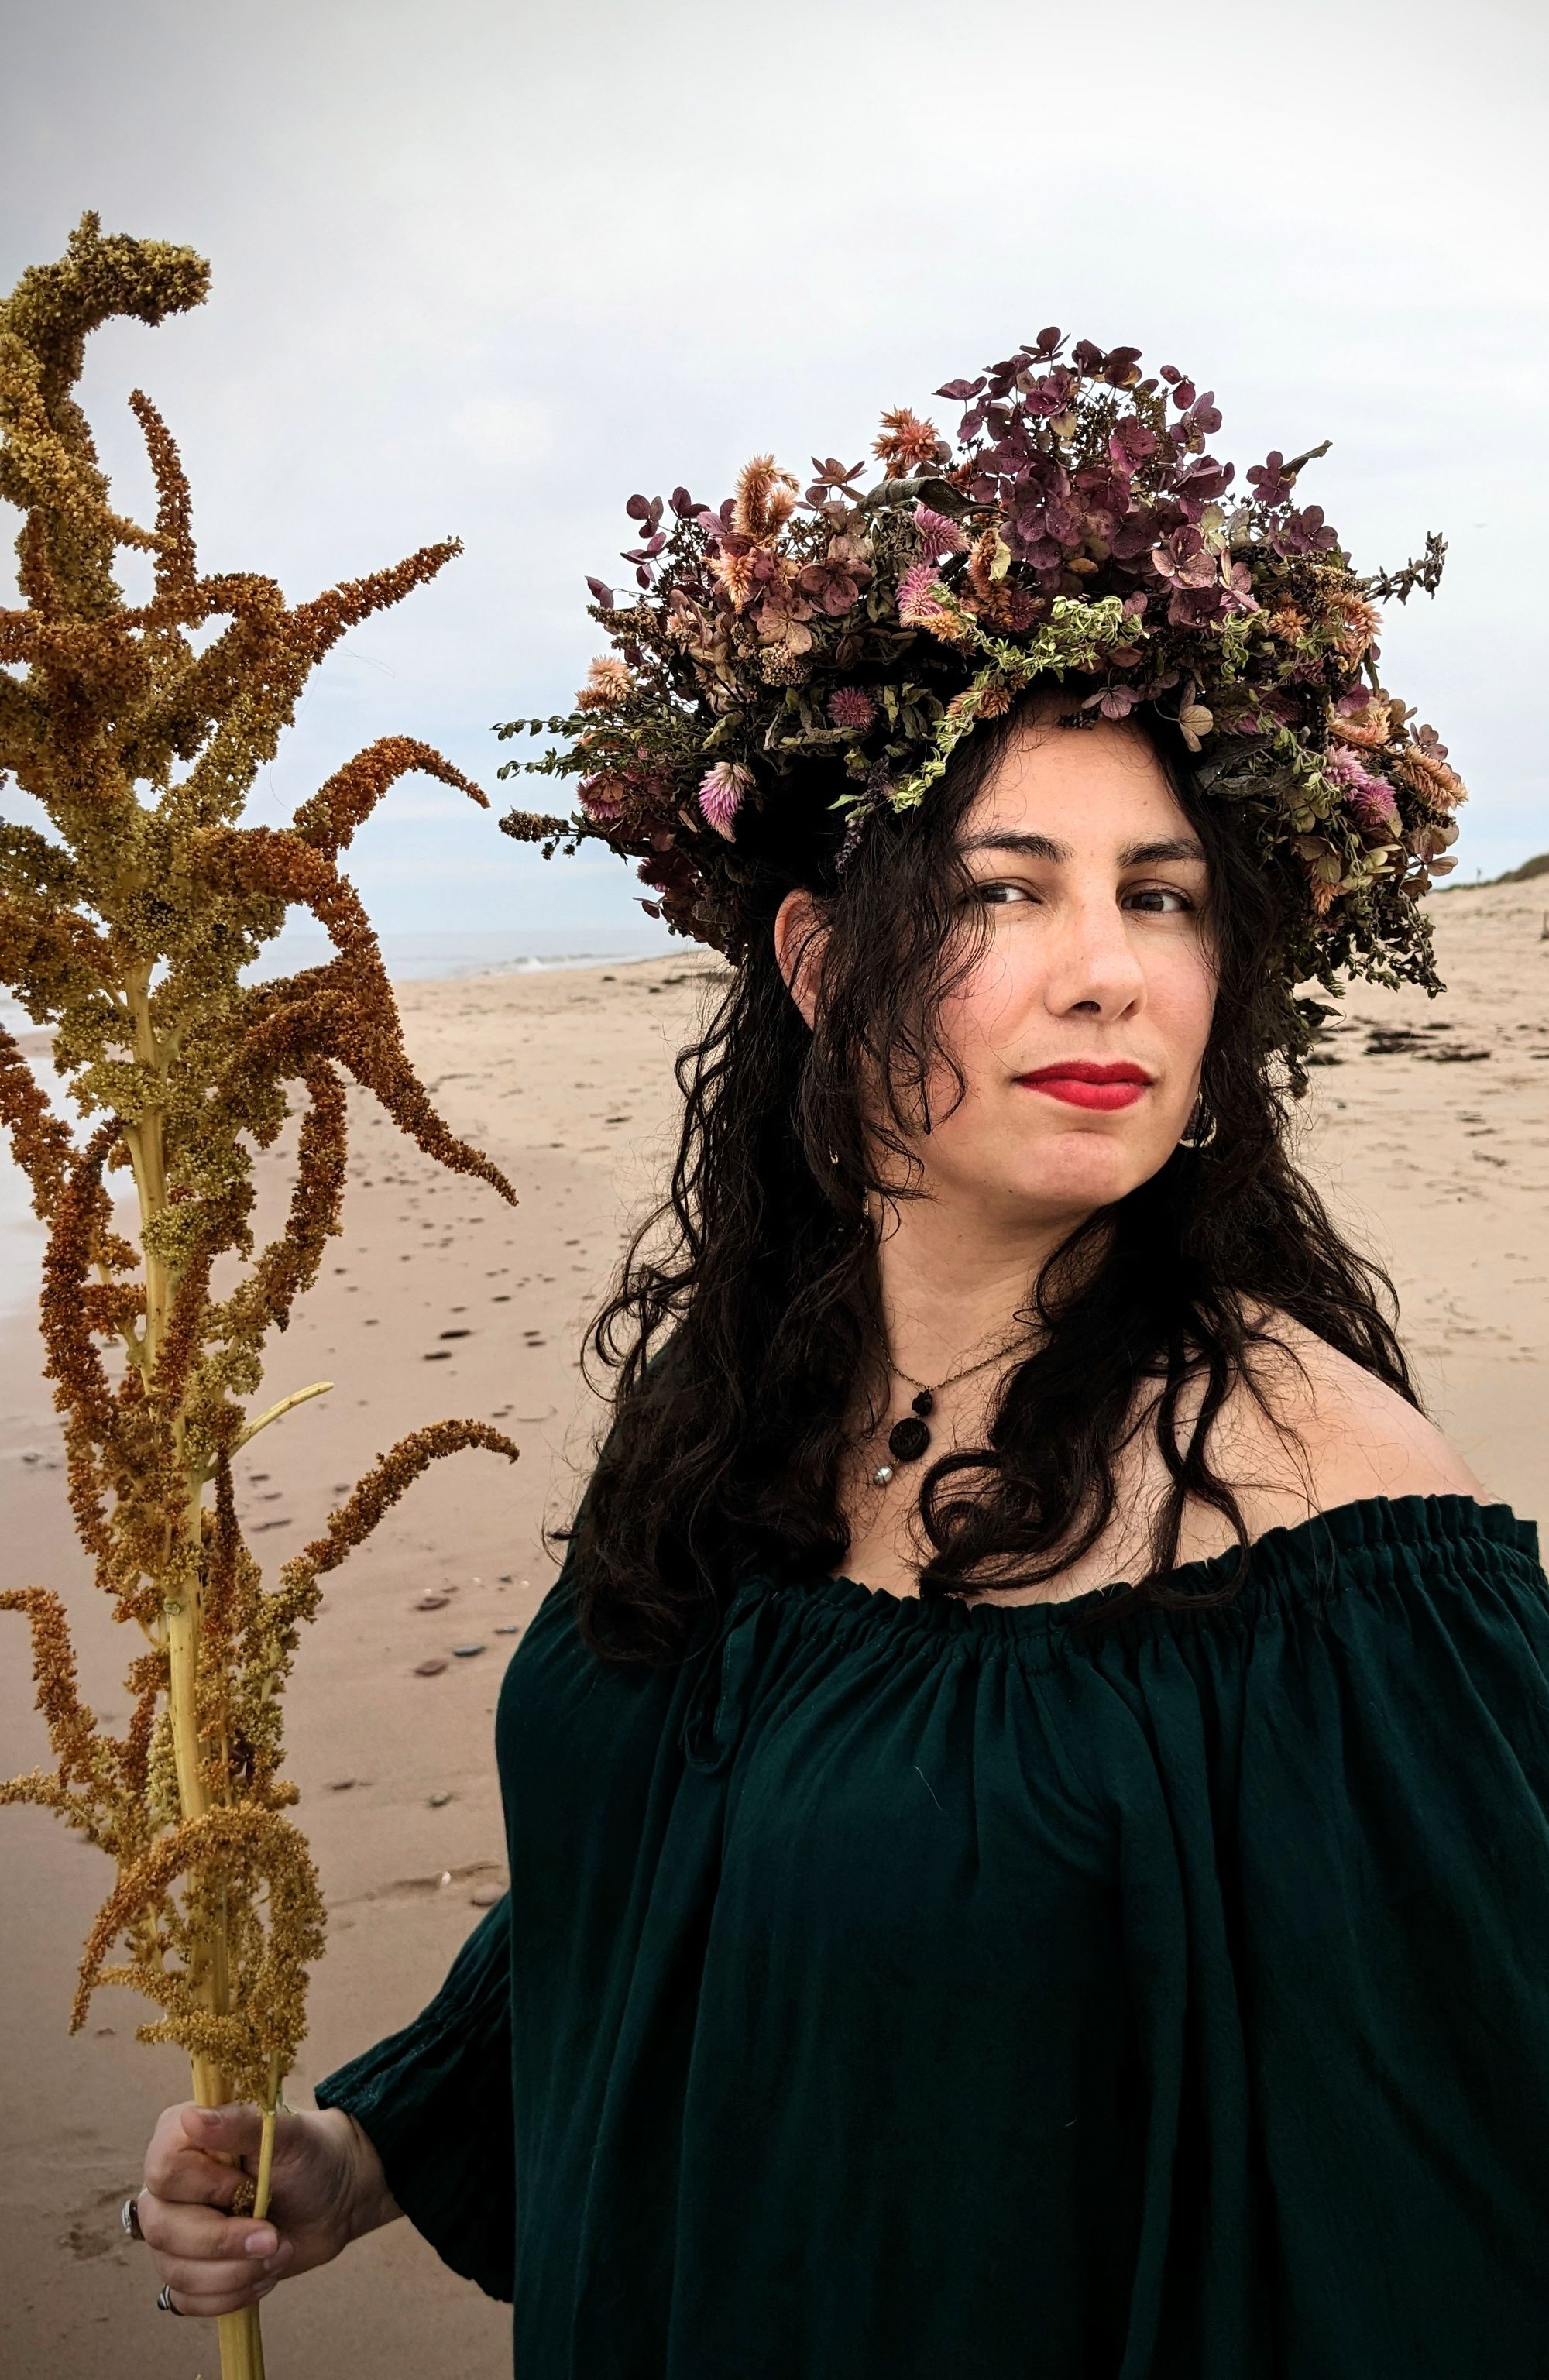 Another entry in the flower-wreath beach portraits: I'm dressed in a flowy dark green shirt falling slightly off one shoulder while holding a stalk of amaranth like a staff and wearing a very elaborate crown of herbs and flowers (celosia, hydrangea, basil, oregano and mint) over my long wavy dark hair, with ocean in the background.